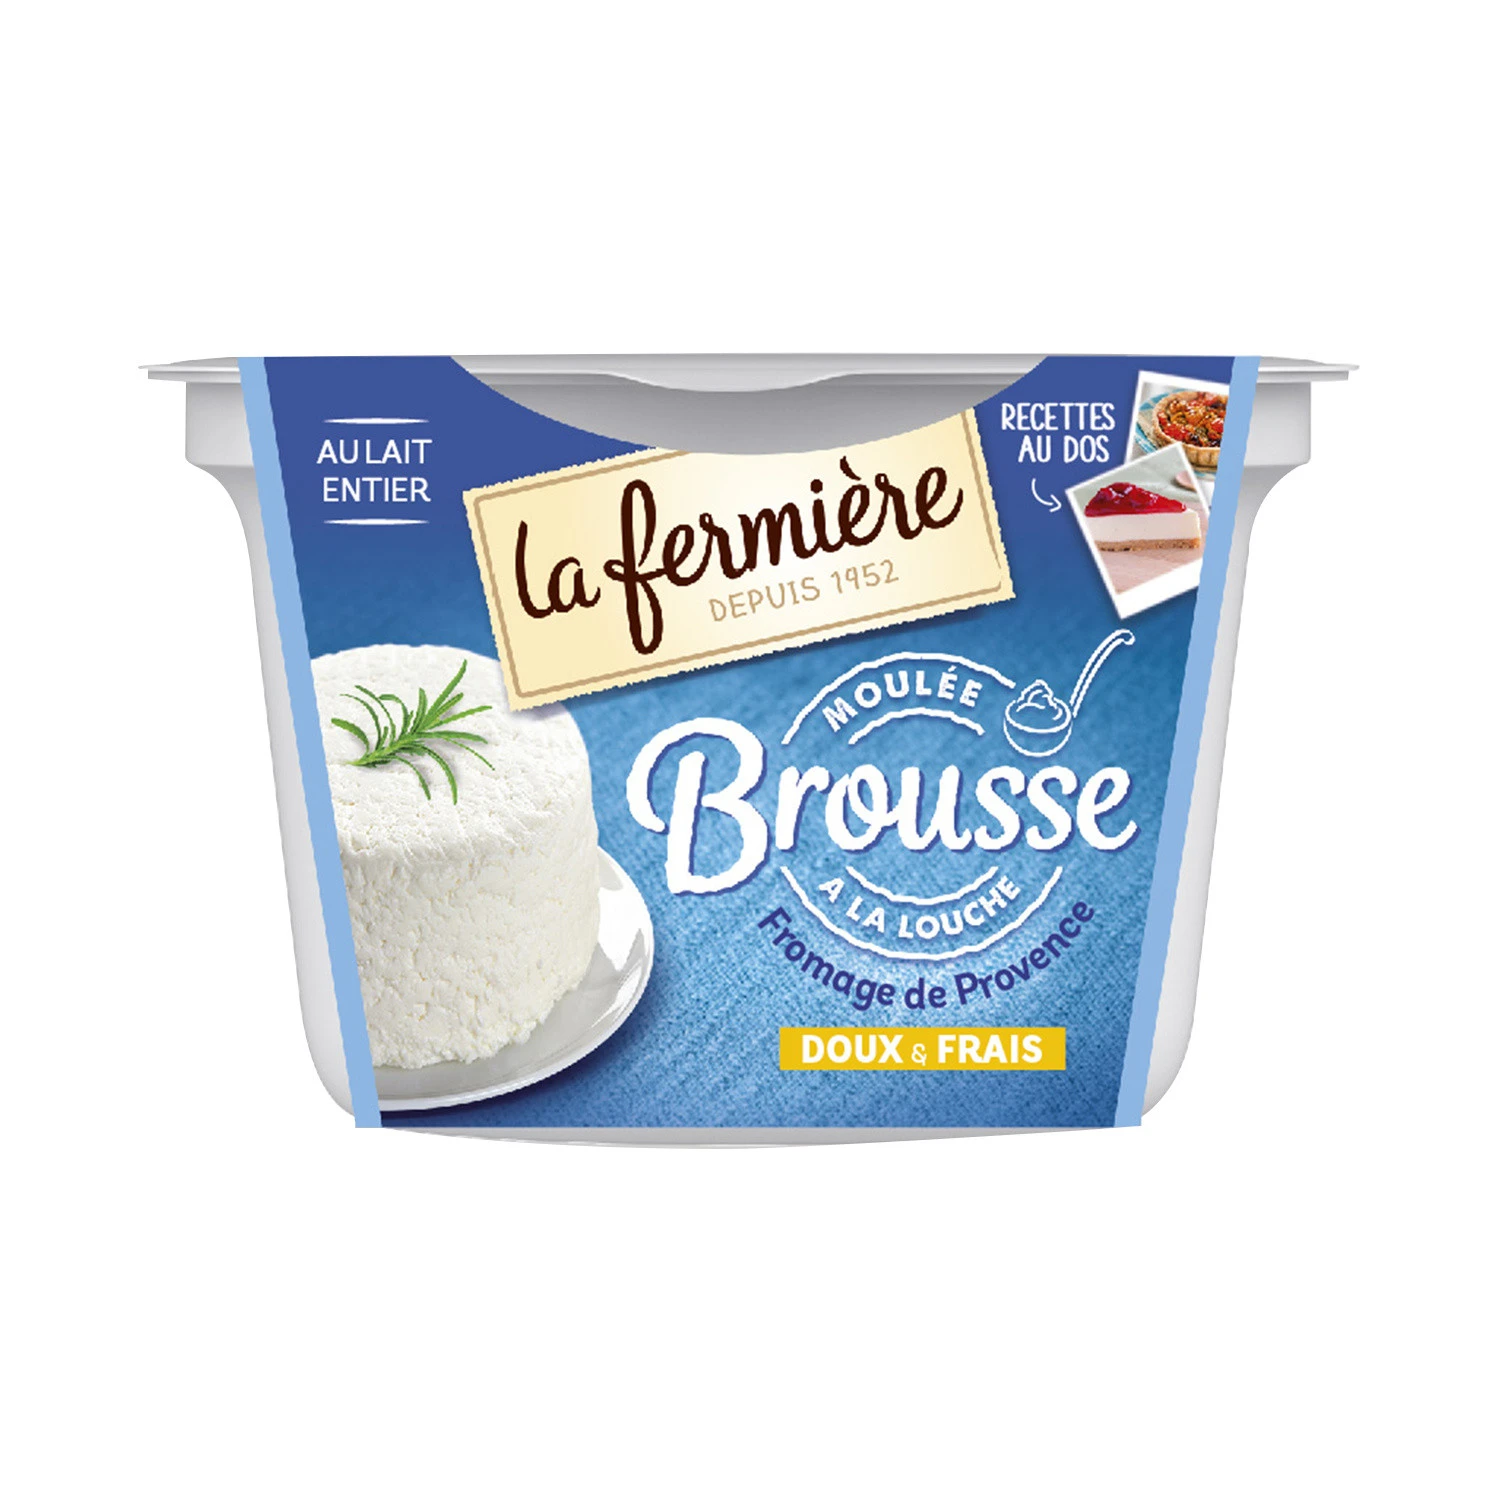 Fresh Brousse cheese La fermiere or other 400g